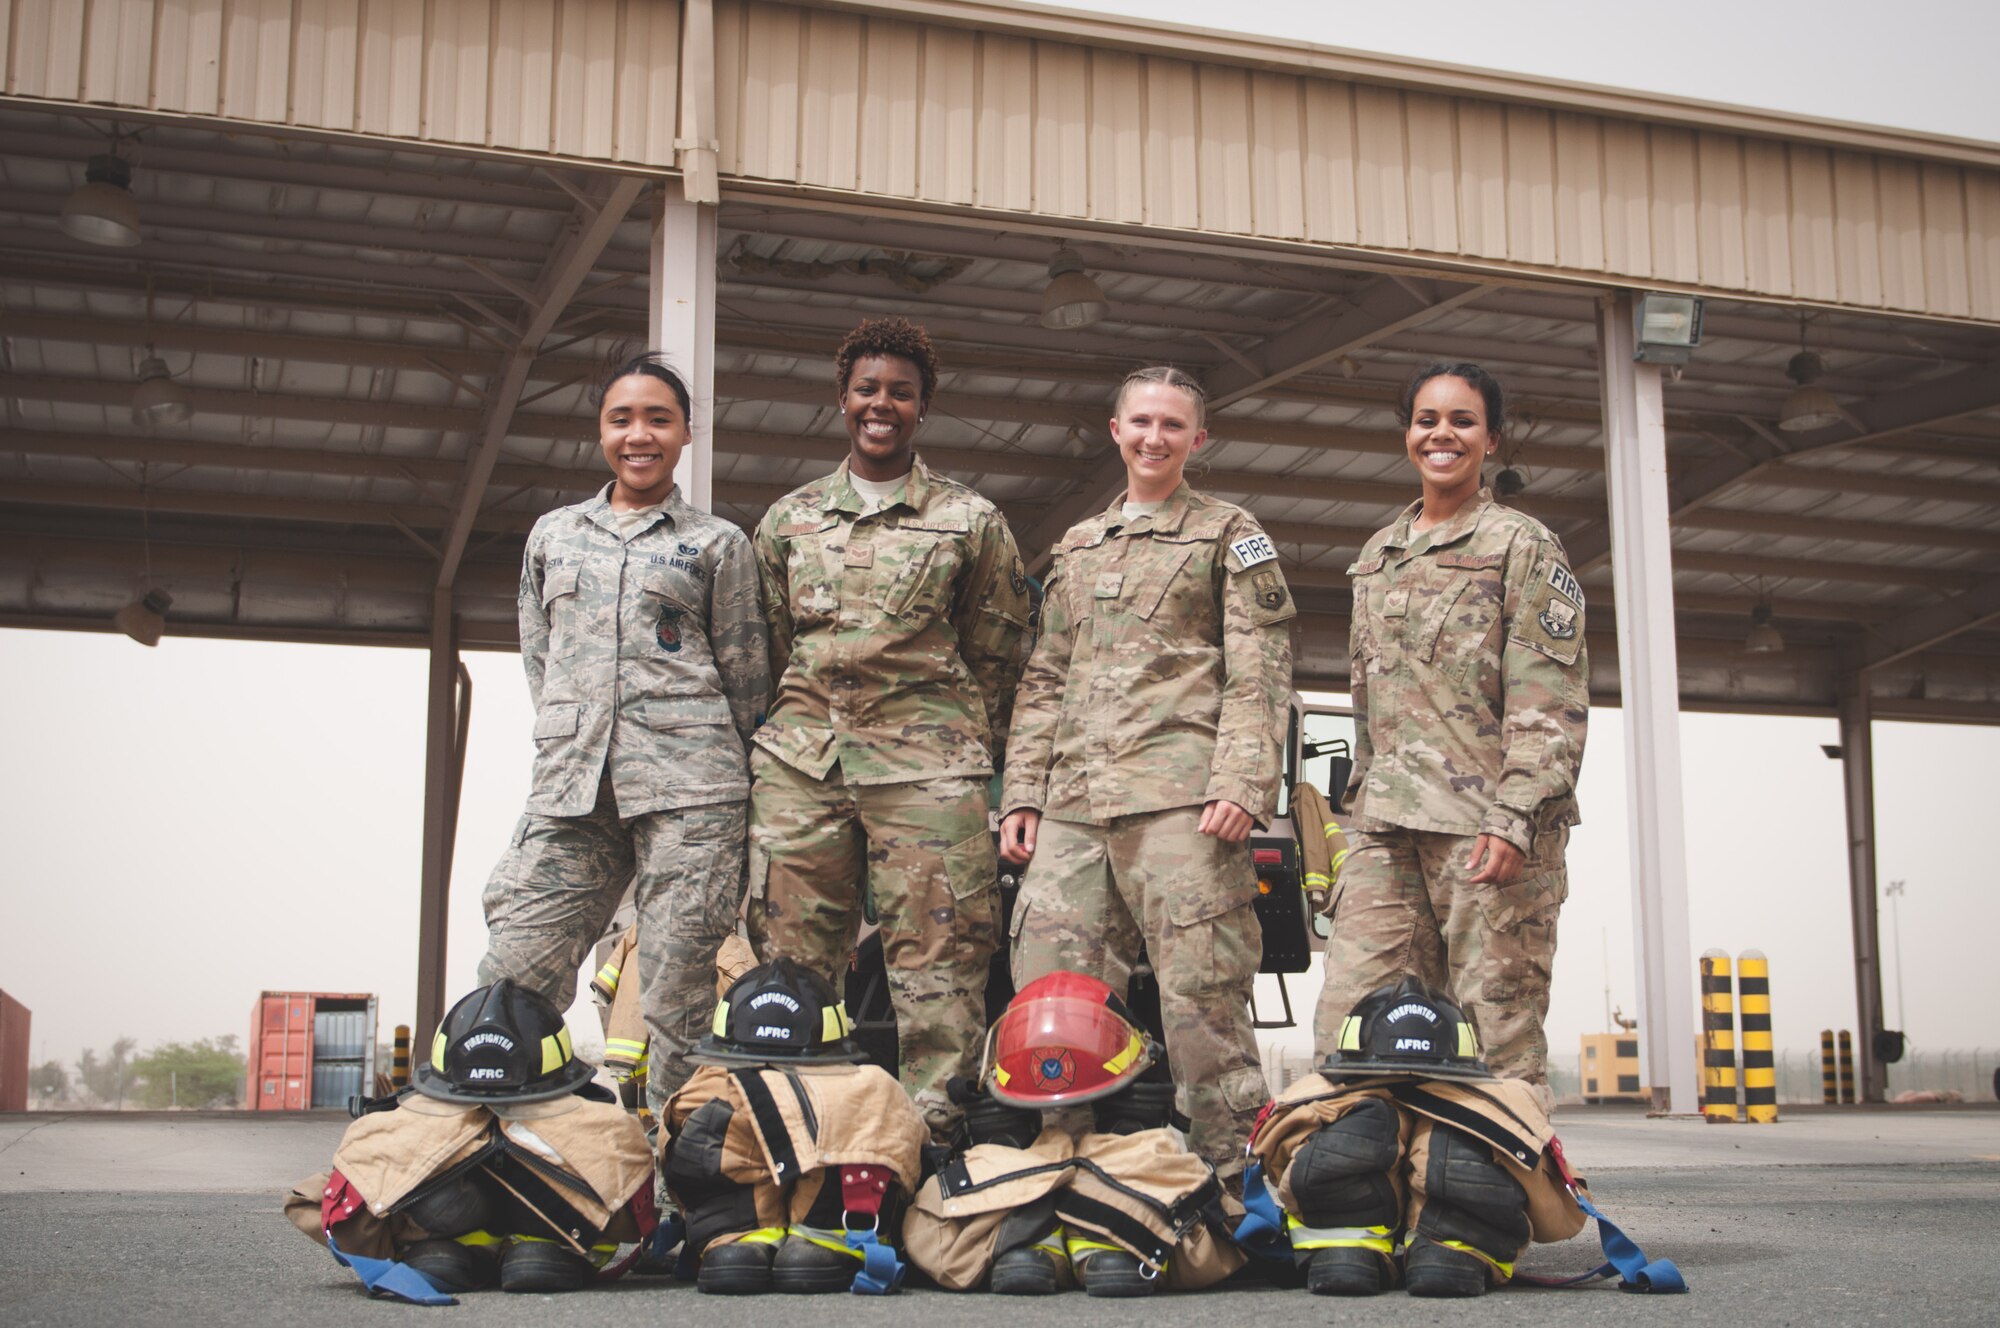 From left to right, Senior Airman Ayanna Gaskin, Senior Airman Christa Dennis, Senior AirmanAshley Eisenbarth, and Staff Sgt. Jessica Mendoza, fire fighters assigned to the 386th Civil Engineer Squadron, pose for a photo Sunday, June 25, 2017, in front of a fire truck in the parking bay ata 386th Air Expeditionary Wing fire station at an undisclosed location in Southwest Asia. (U.S. Air Force photo by Master Sgt. Eric M. Sharman)